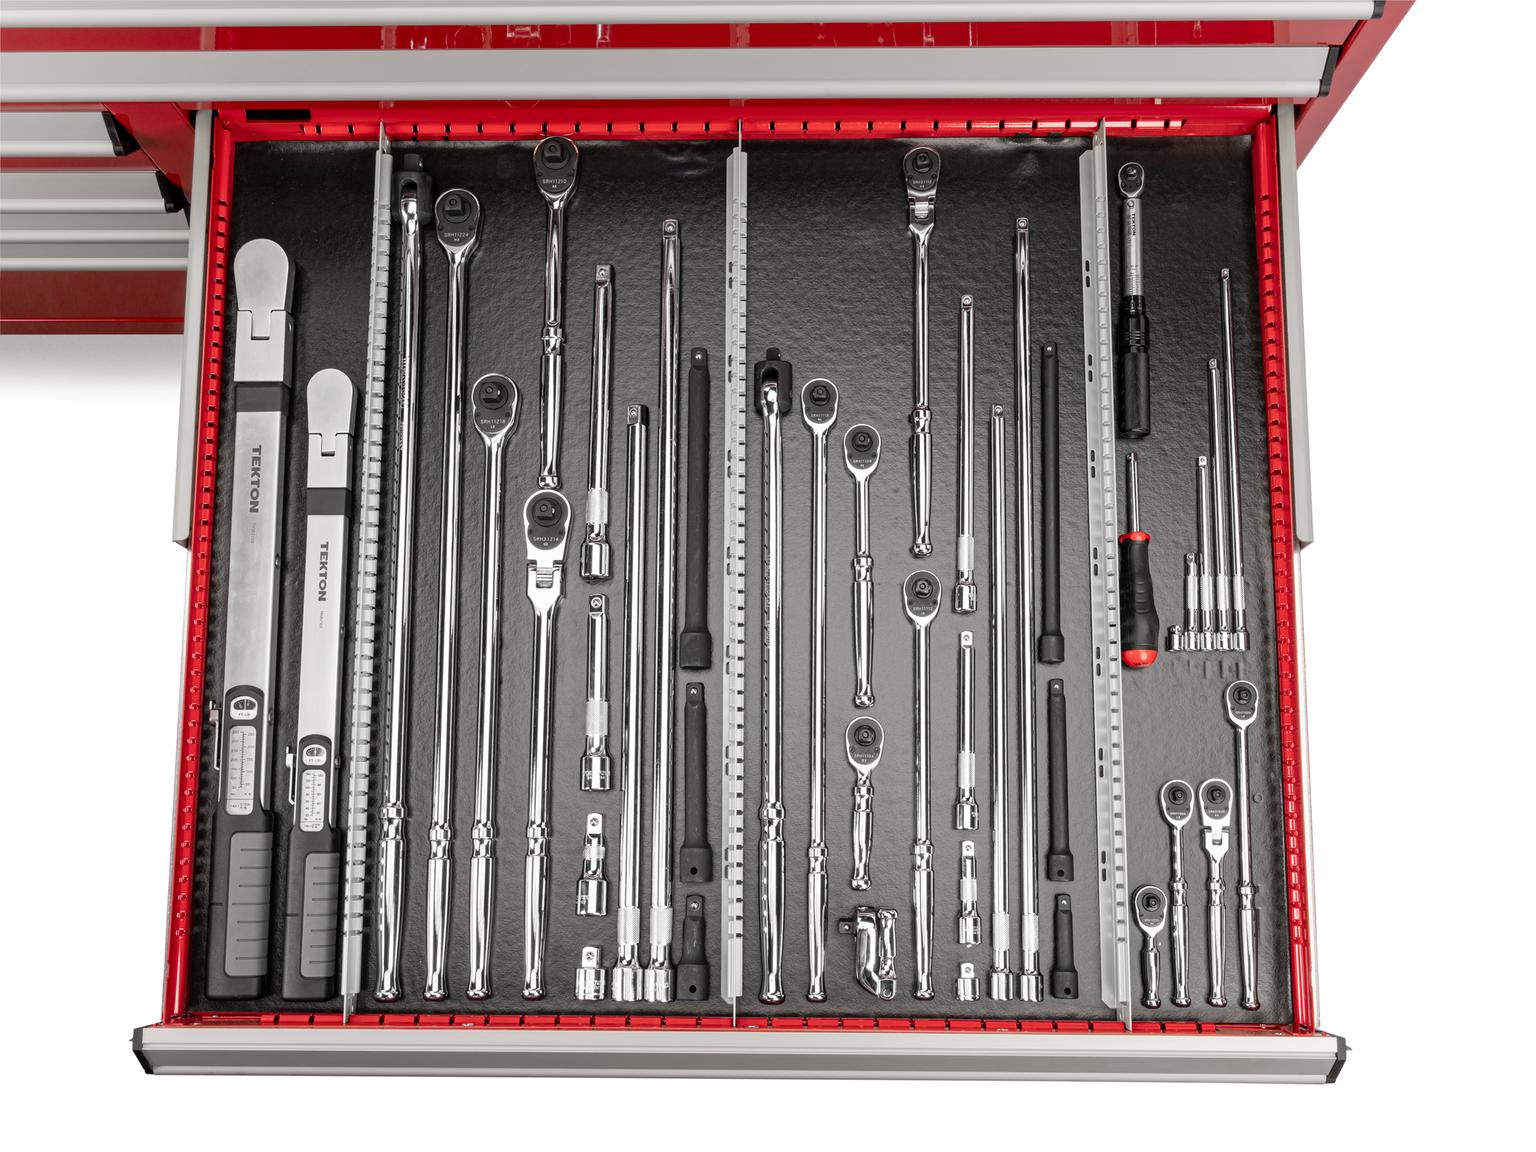 Socket Drive Tool and Extension Bundle, 41-Piece (fits 36 x 30 x 3 in. Drawer)